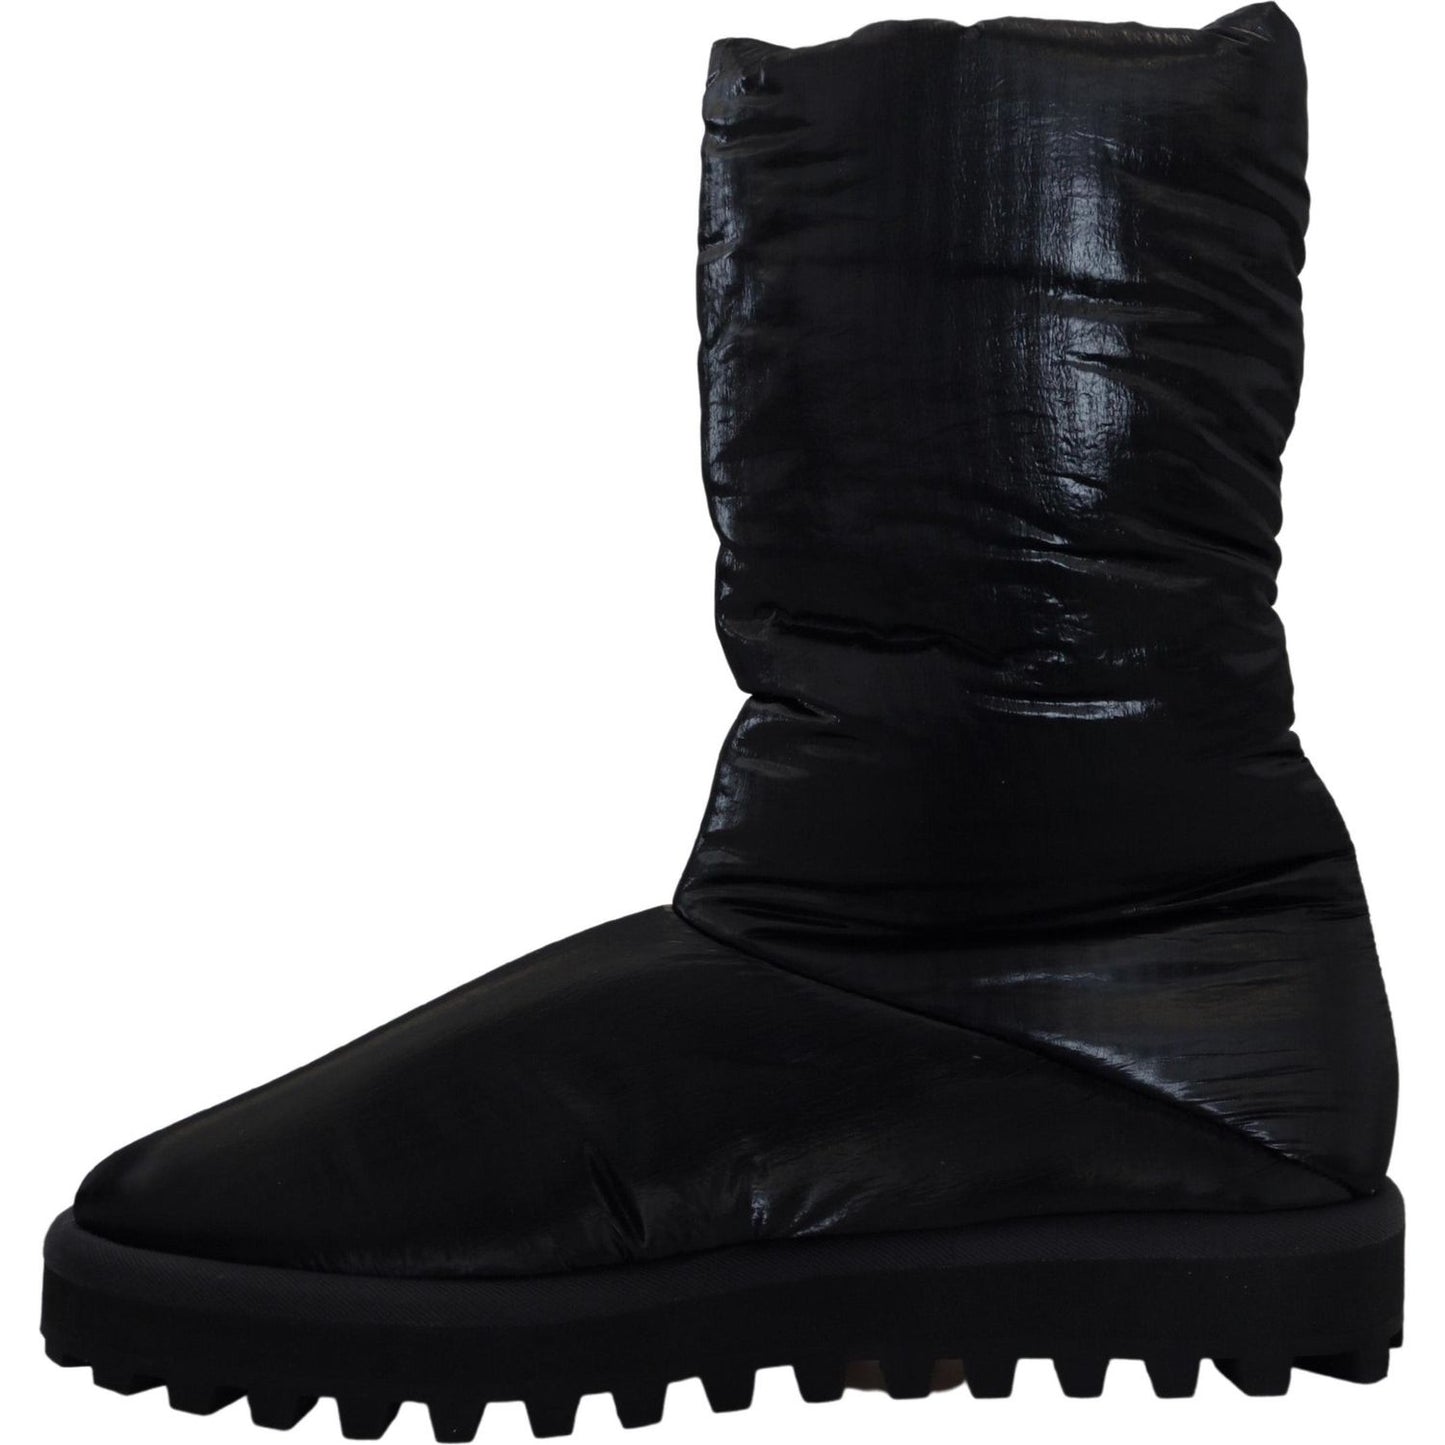 Dolce & Gabbana Elegant Mid-Calf Boots in Black Polyester black-boots-padded-mid-calf-winter-shoes IMG_6174-e35cf016-5ba.jpg